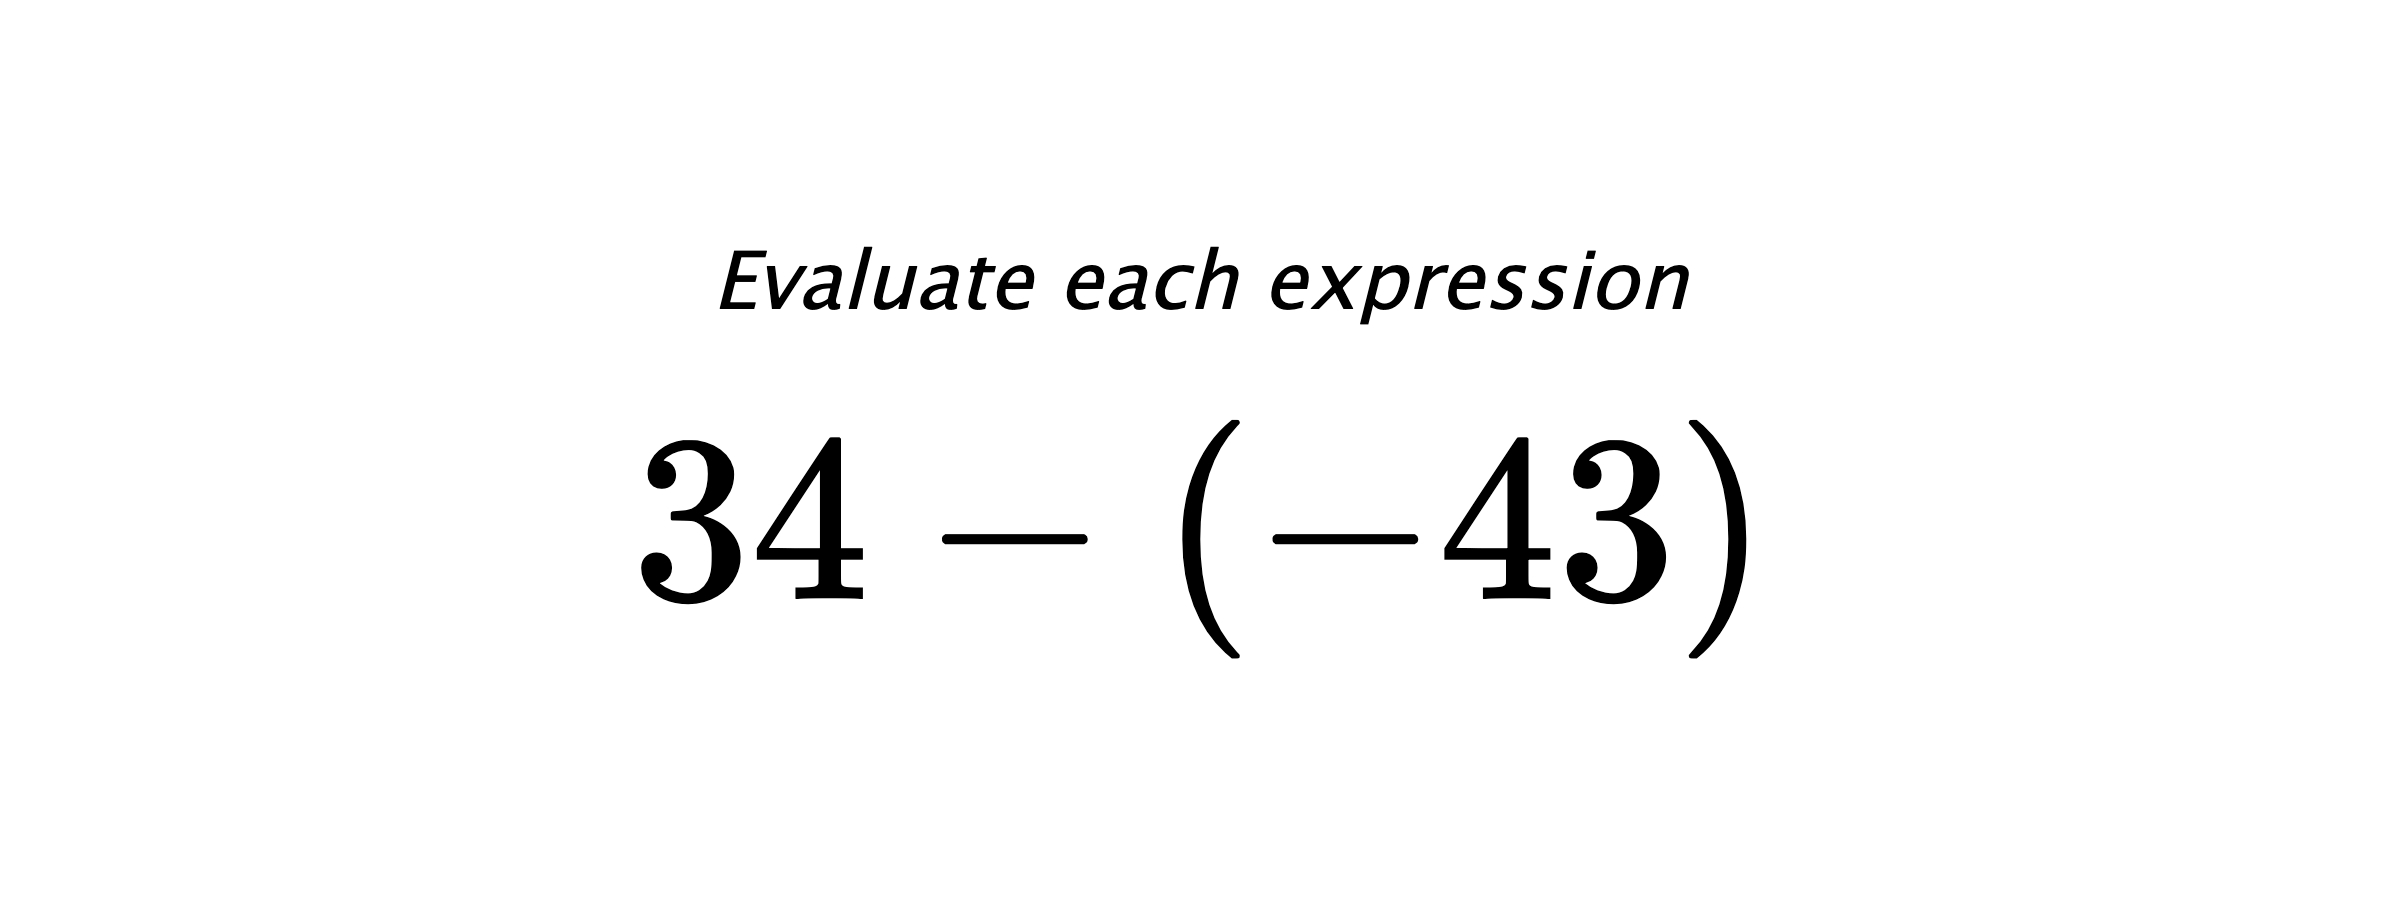 Evaluate each expression $ 34-(-43) $